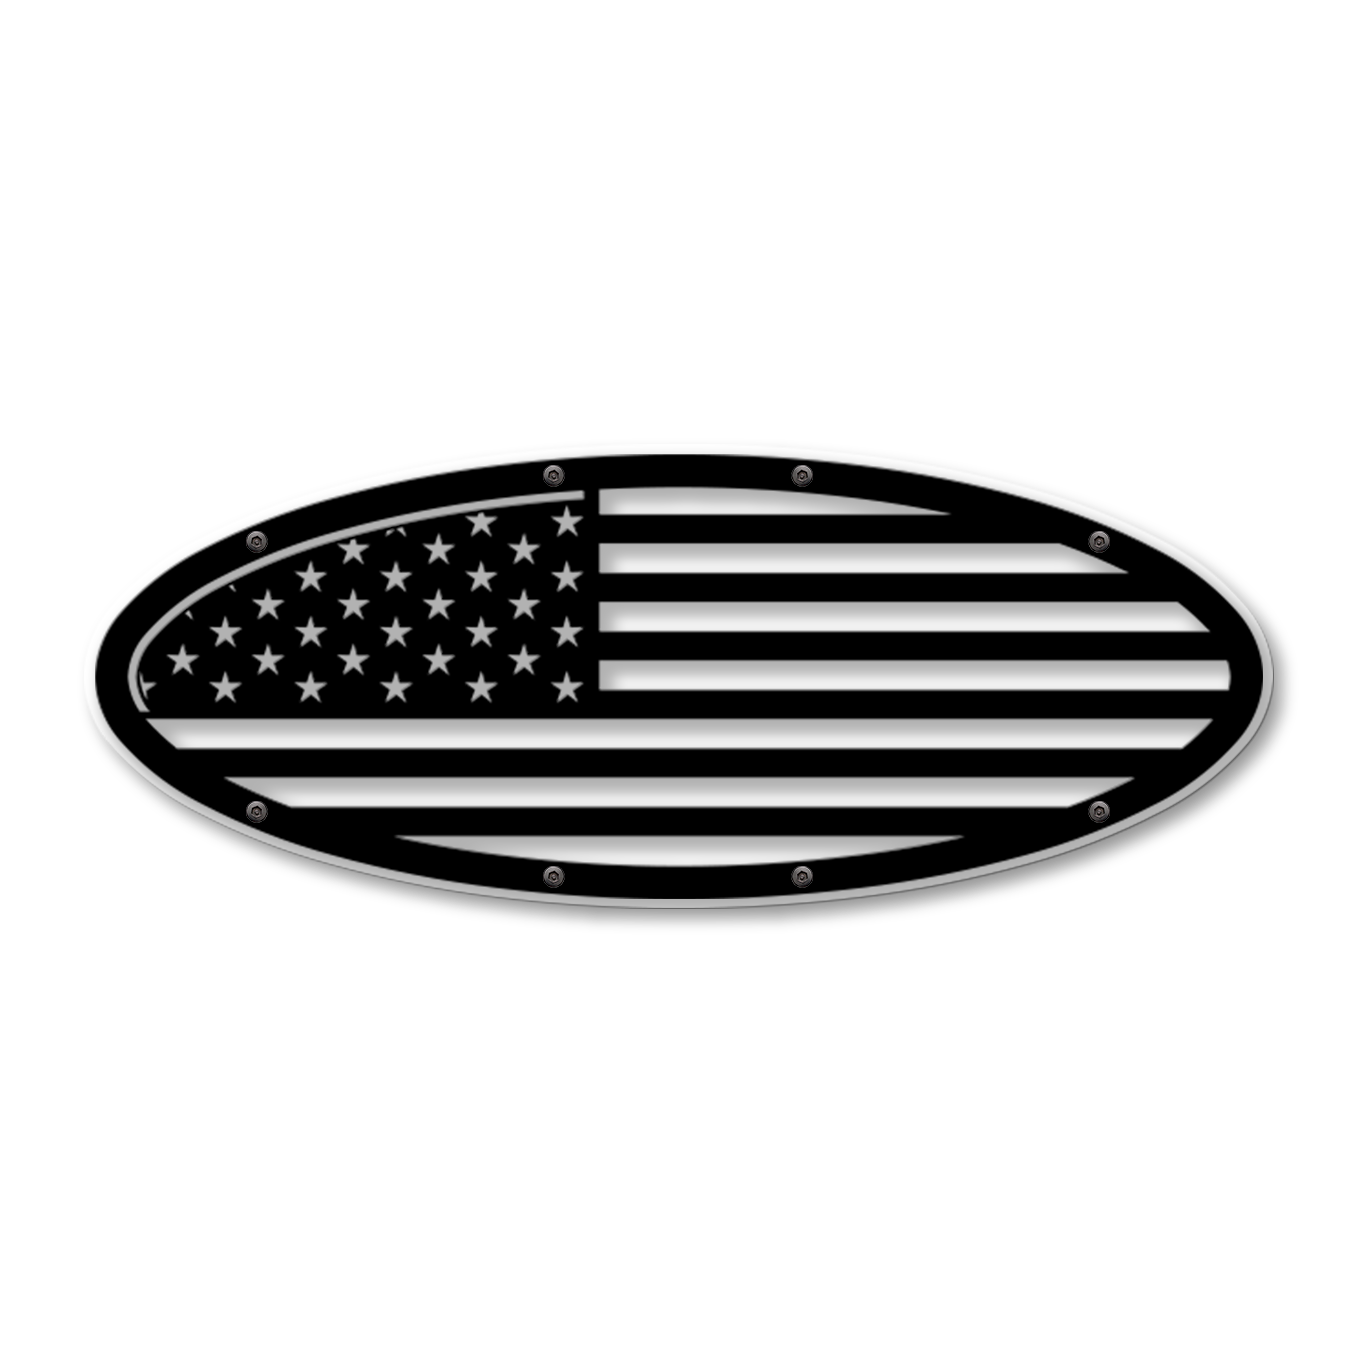 American Flag Oval Replacement - Fits Multiple Ford® Trucks - Fully Customizable Colors